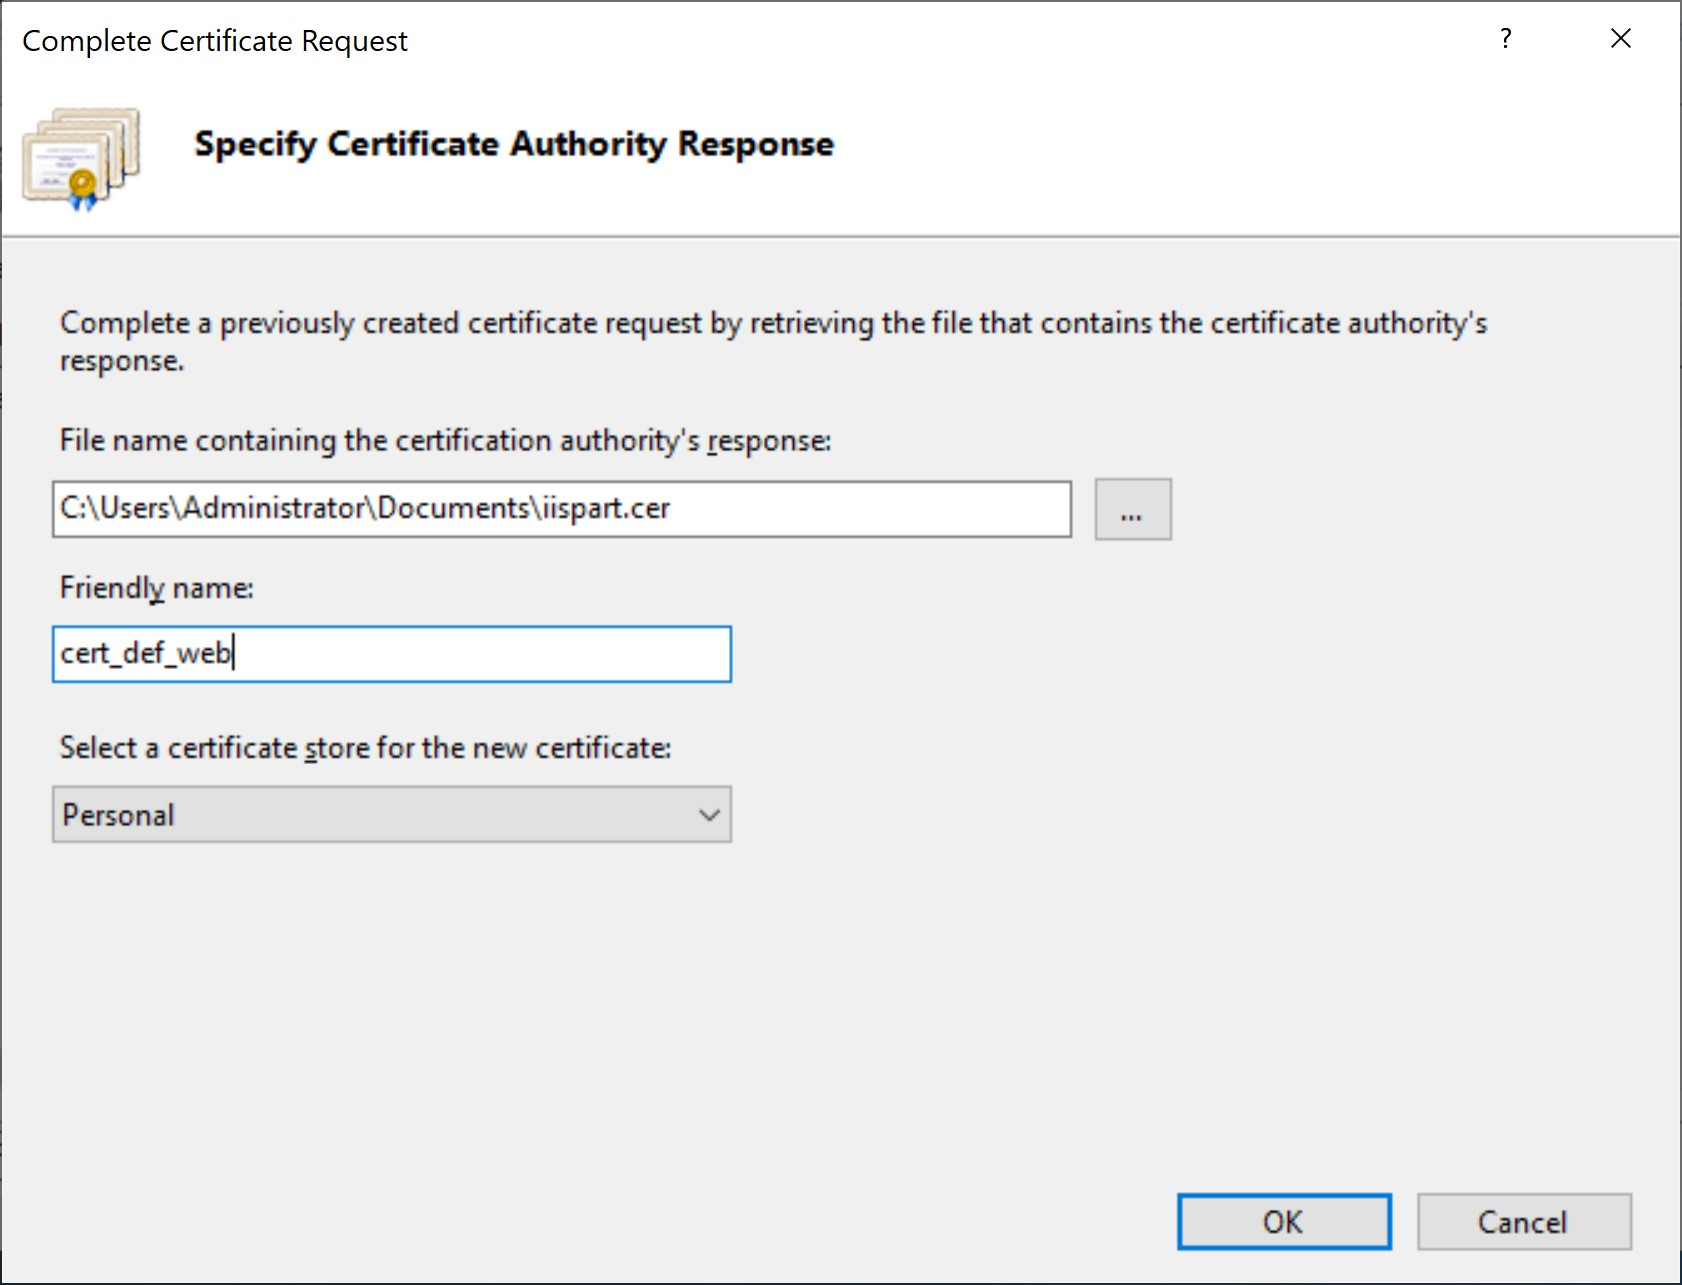 _IIS Manager_, inform the path of the certificate file received by the CA